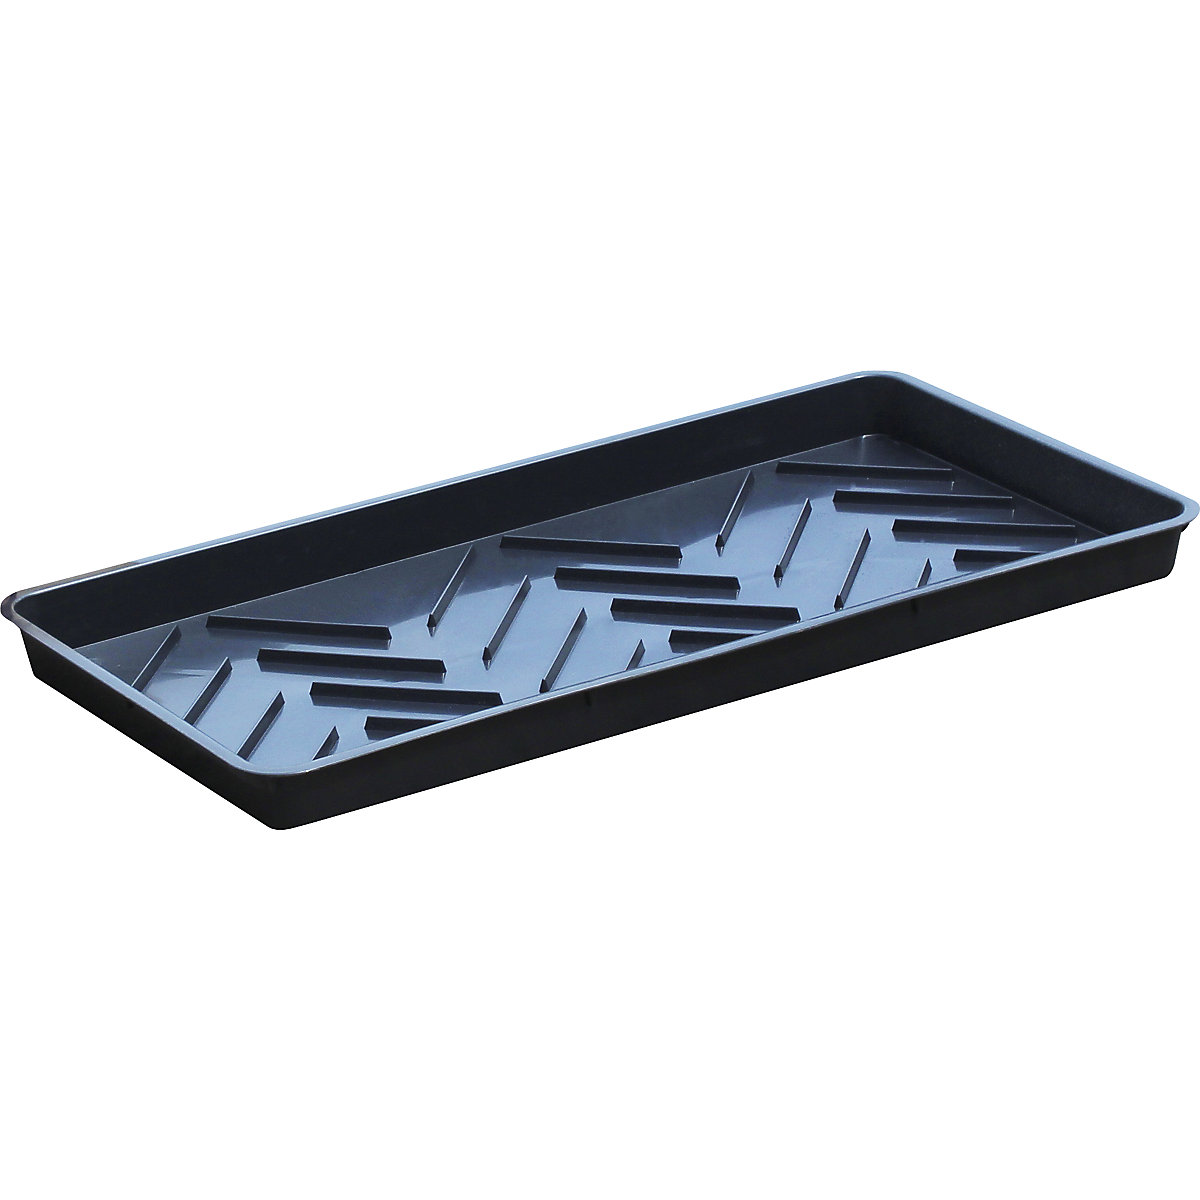 PE sump tray for small containers